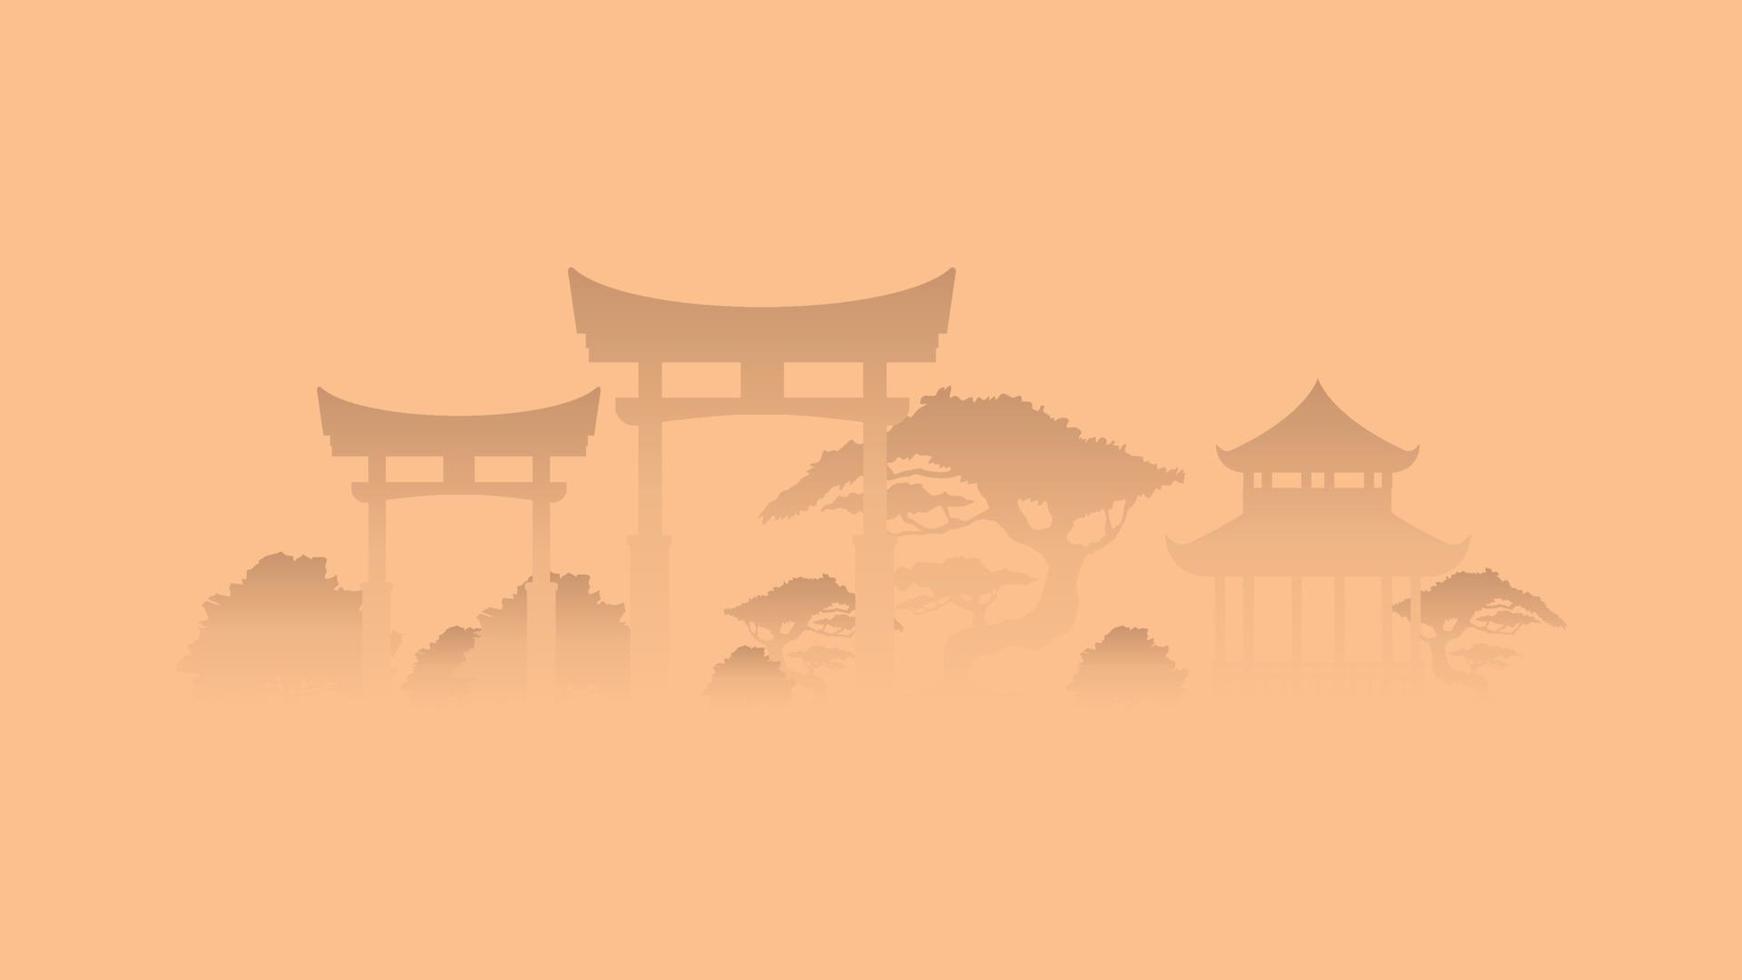 Asian architecture in foggy silhouette at sunrise. Horizontal banner. Designs for posters, web sites, postcards. Vector